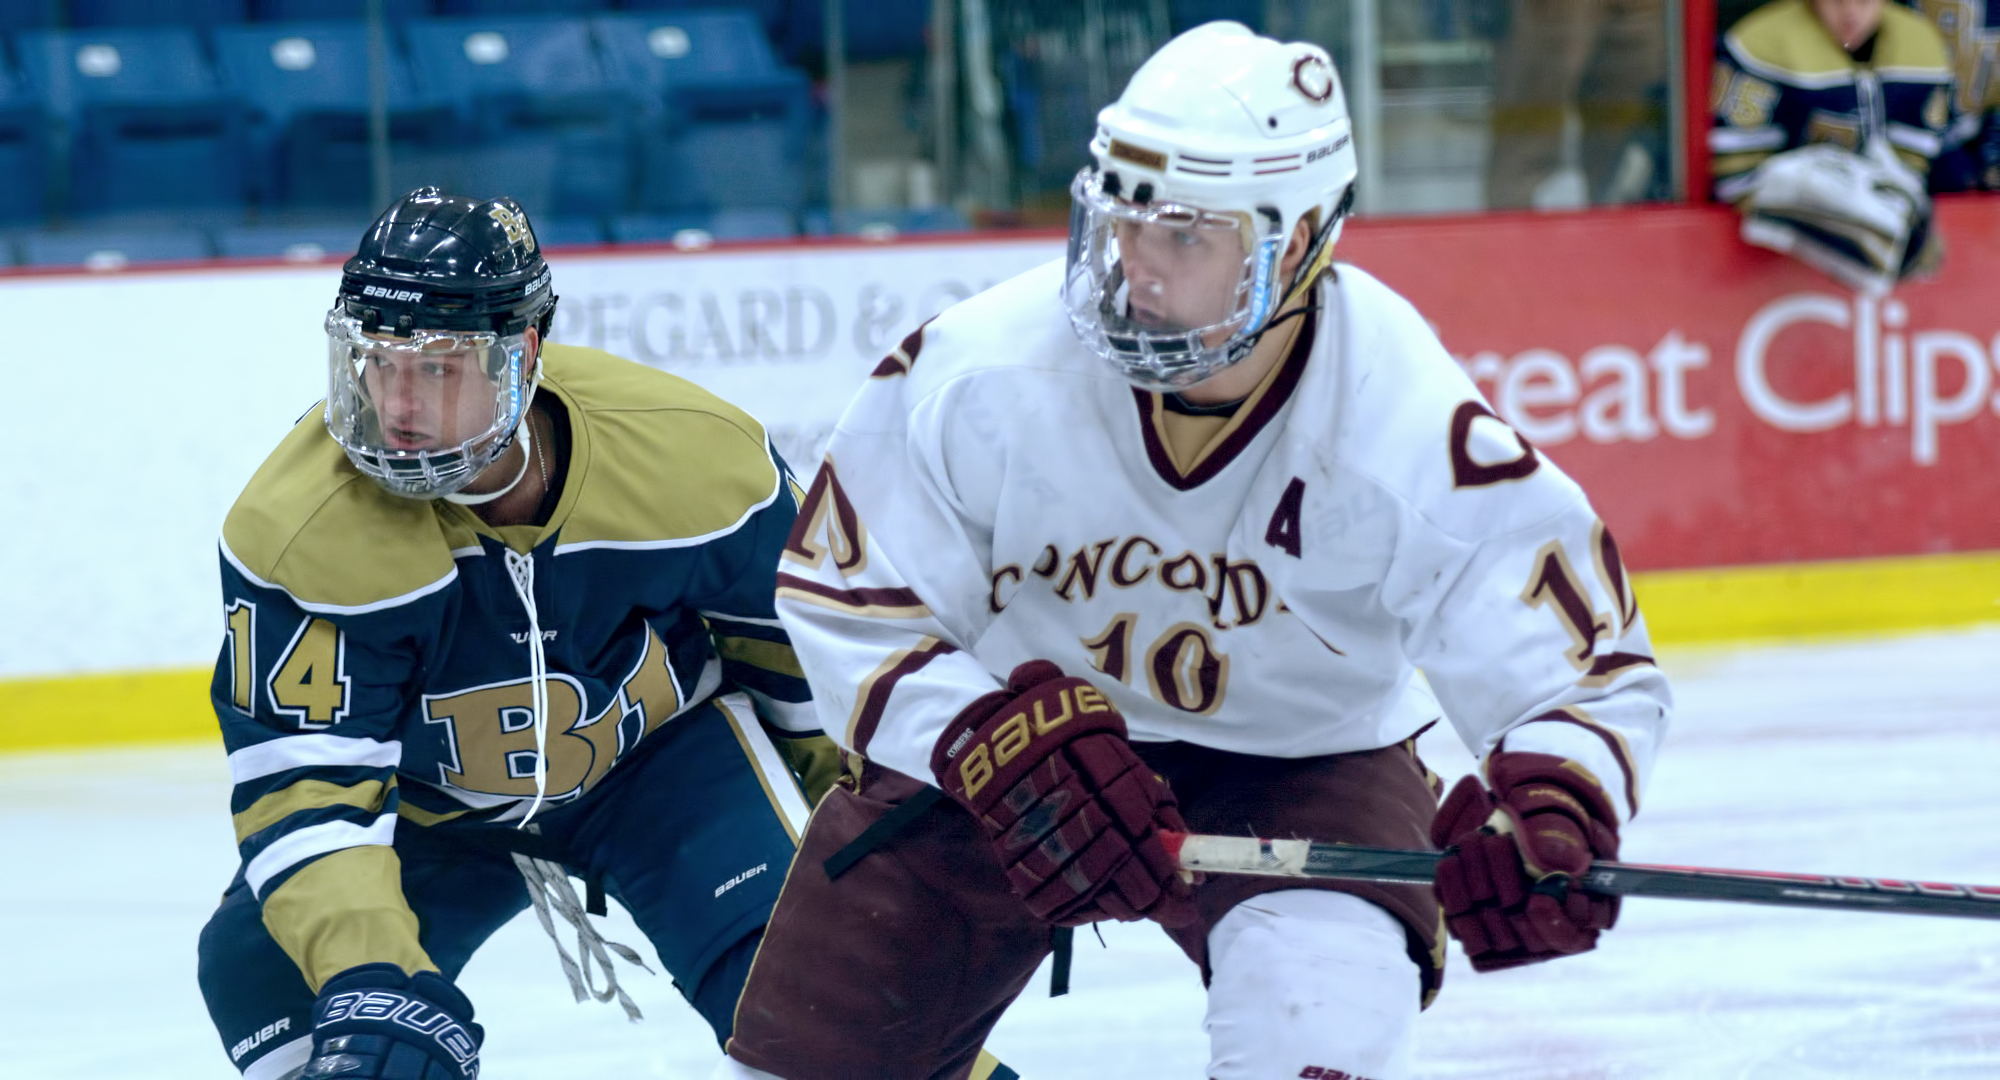 Zach Doerring watches his shot on goal during the Cobbers' 2-1 win against Bethel. Doerring had the game-winning goal in the third period of play.